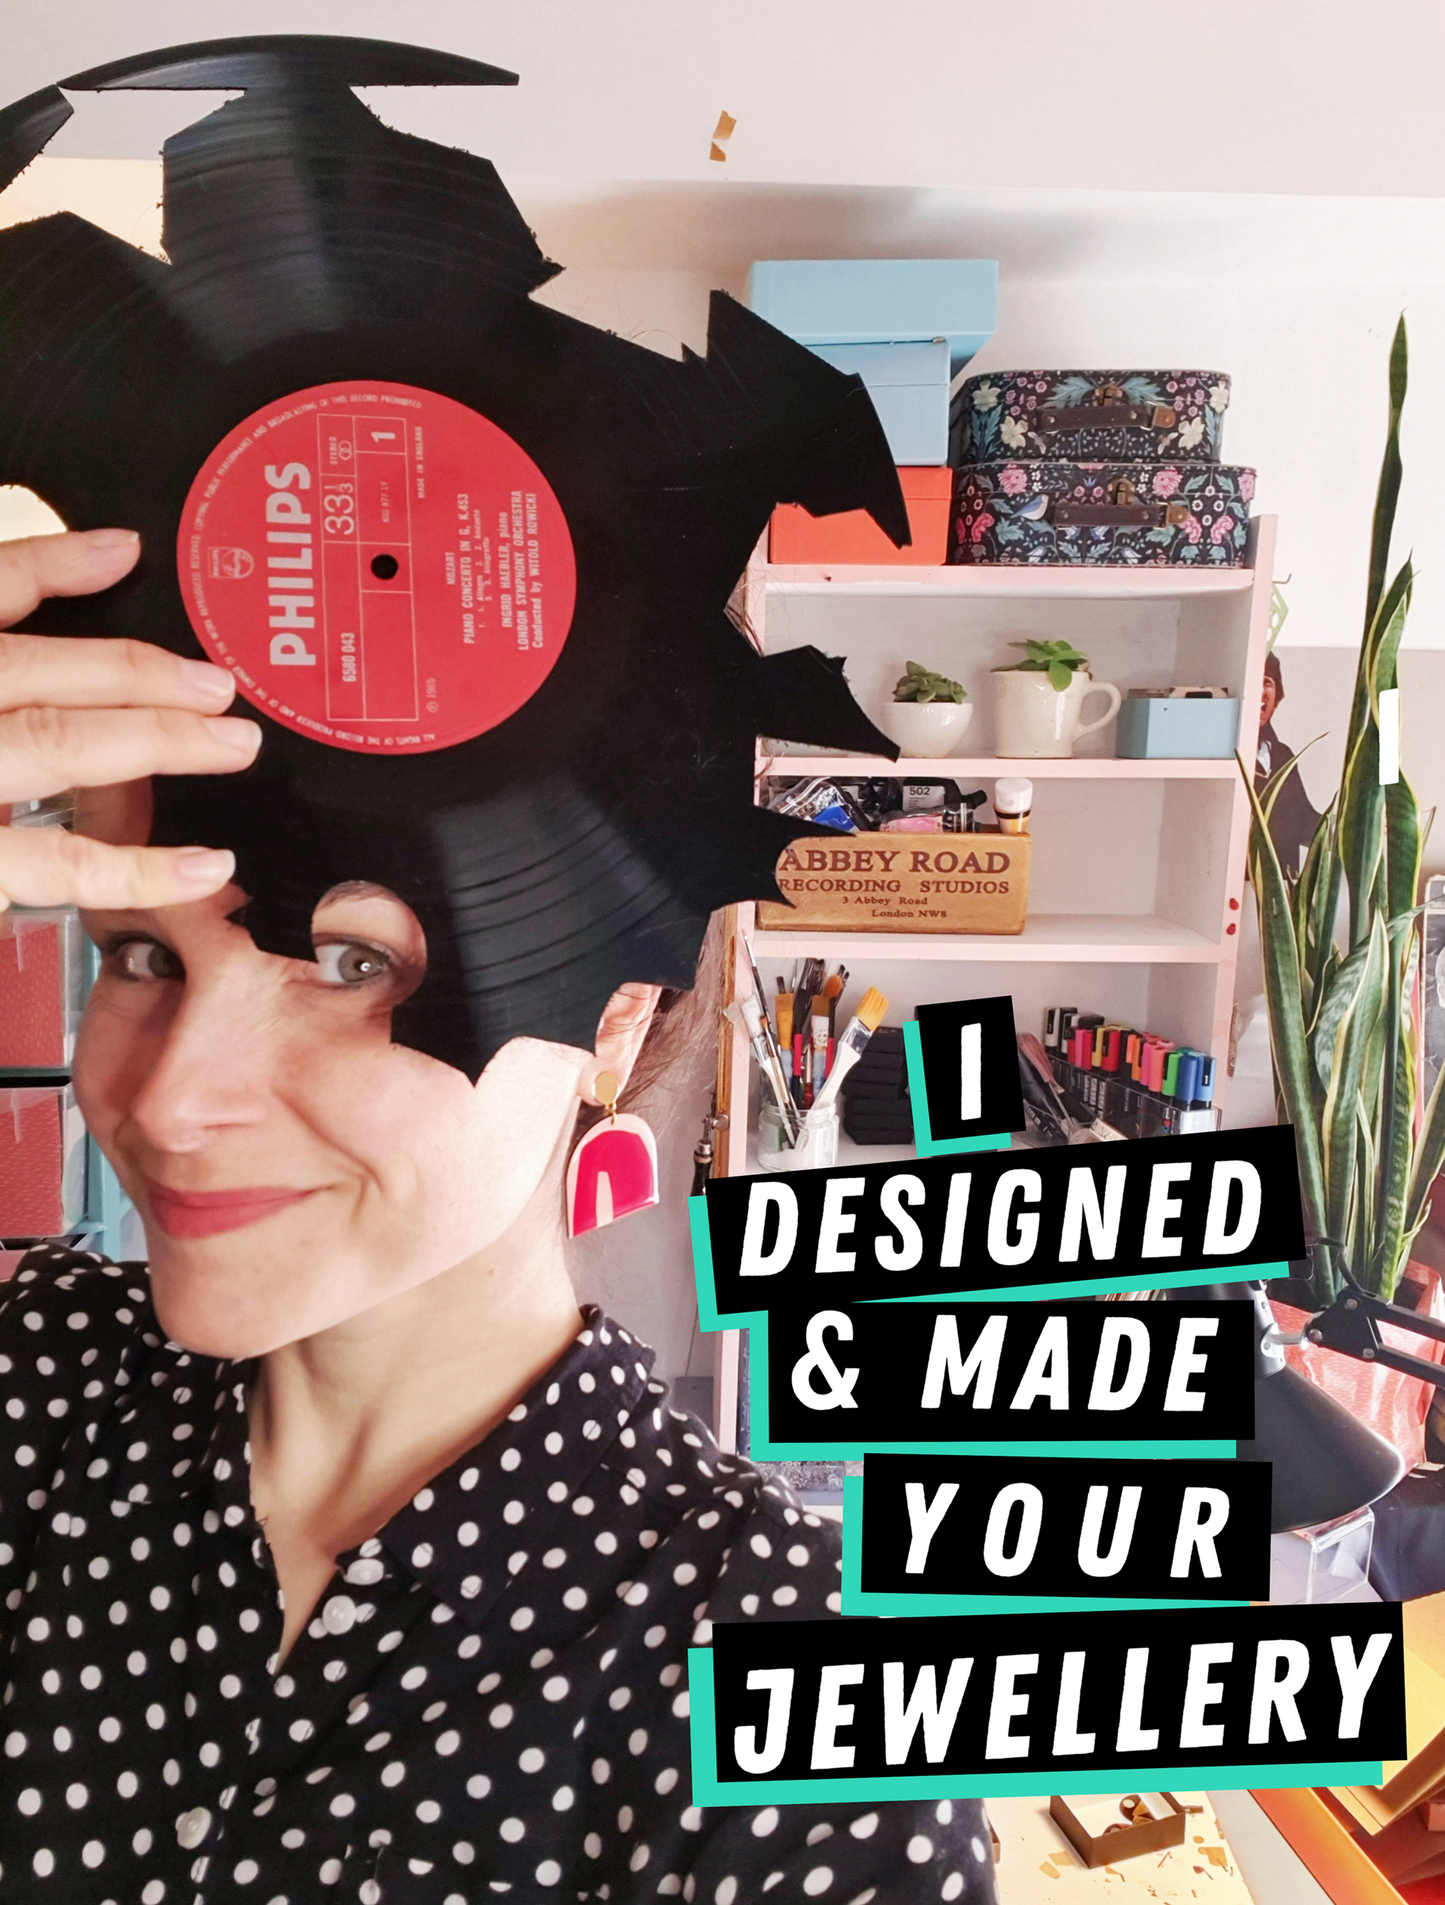 A pair of very EPIC upcycled vinyl record earrings